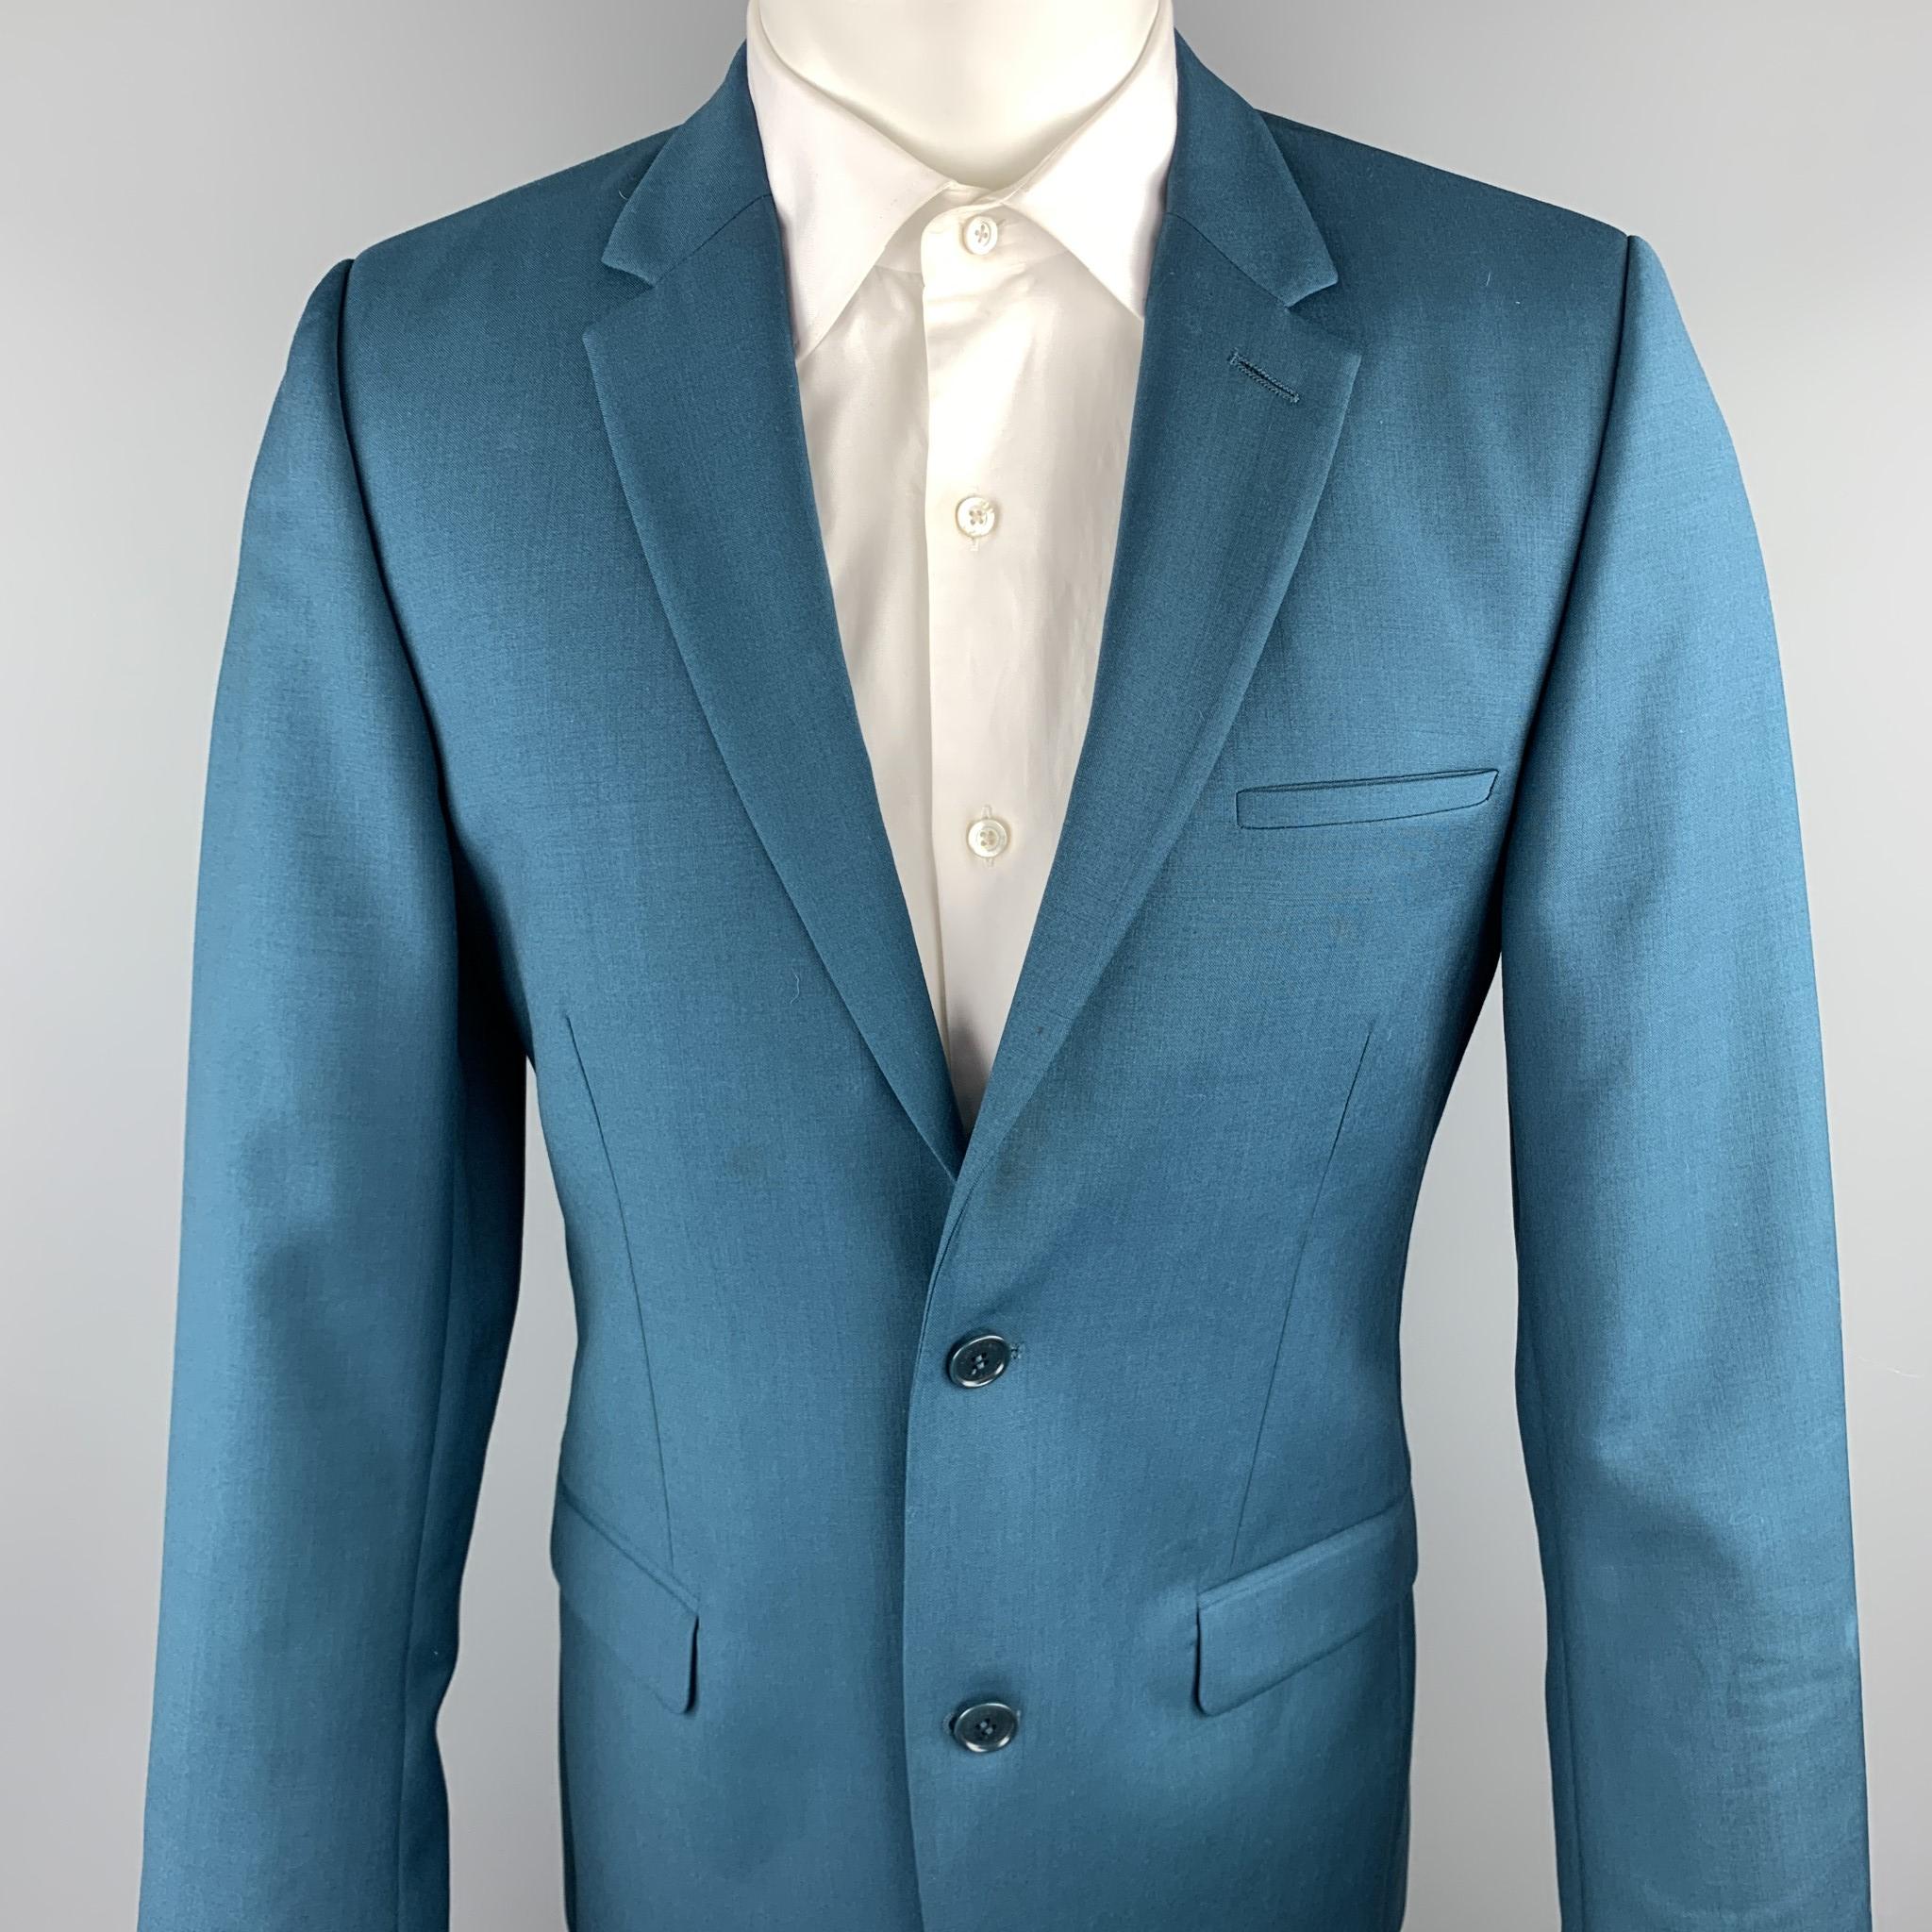 CALVIN KLEIN COLLECTION sport coat comes in a teal wool featuring a notch lapel, flap pockets, and a two button closure. Minor discoloration. As-Is.

Good Pre-Owned Condition.
Marked: 48/38

Measurements:

Shoulder: 17 in. 
Chest: 38 in. 
Sleeve: